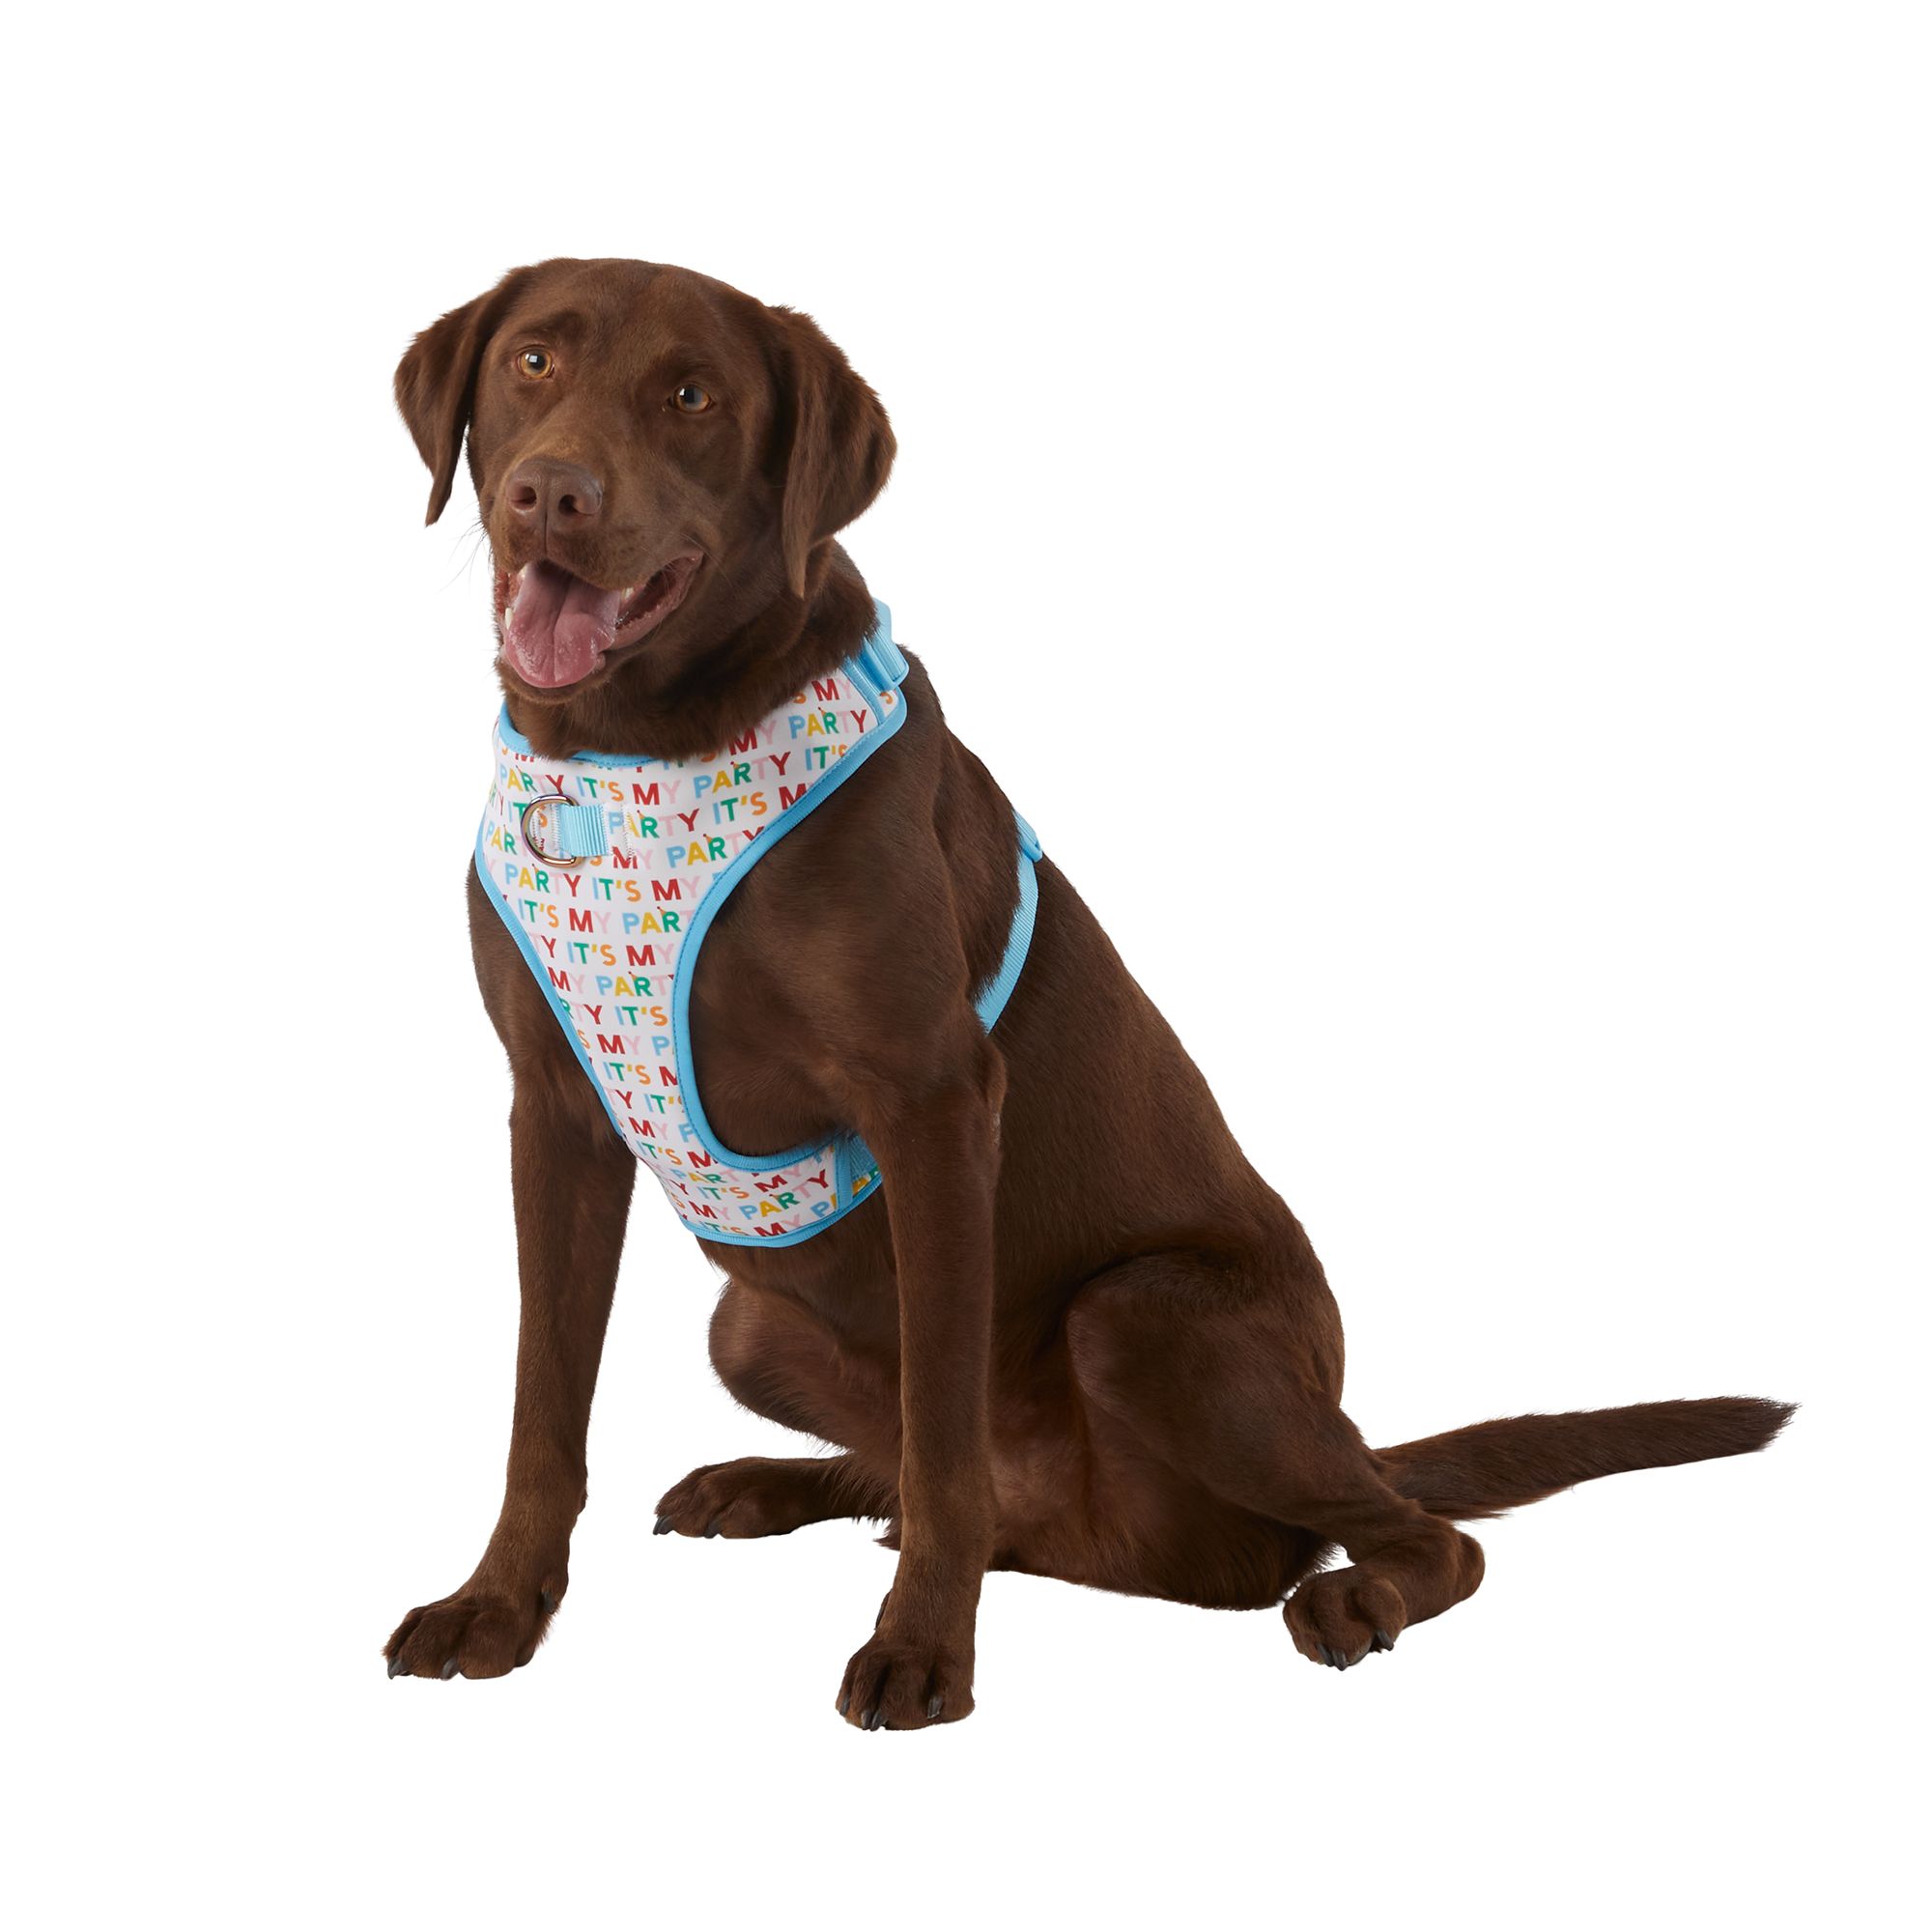 louis vuitton monogram dog harness with free